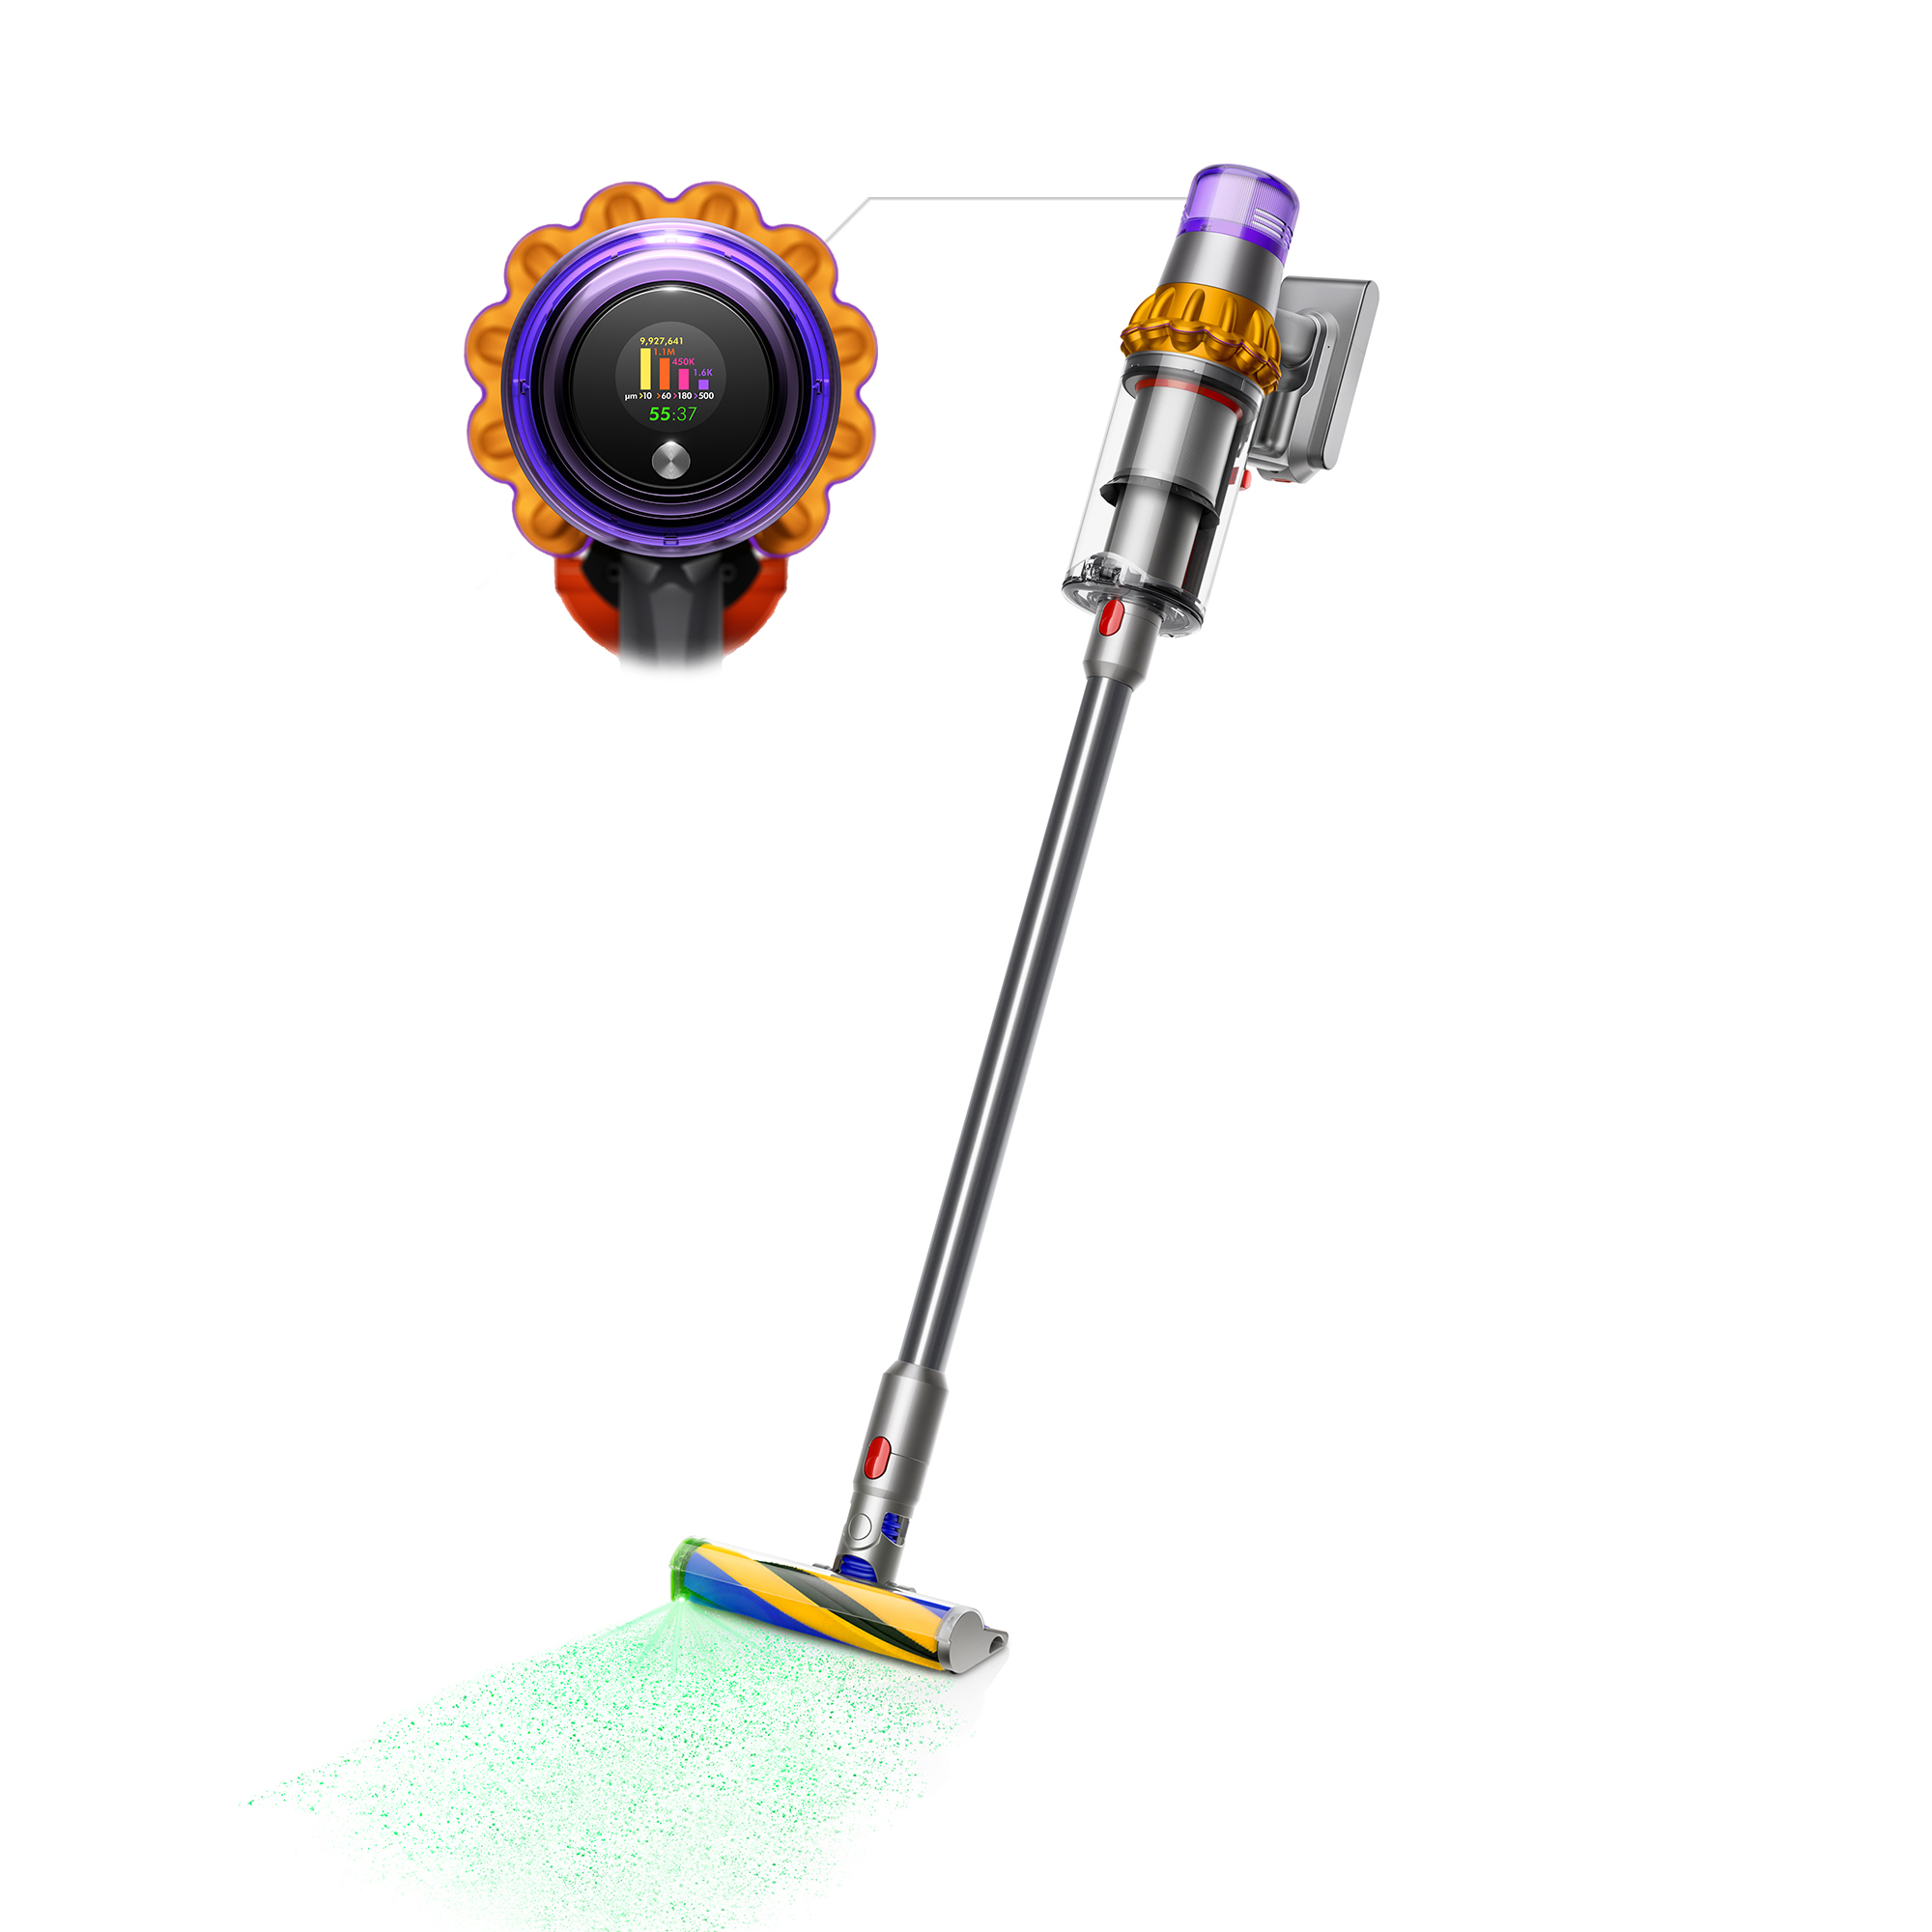 Dyson V15 Detect Vacuum | Yellow/Nickel | Previous Gen - image 1 of 8